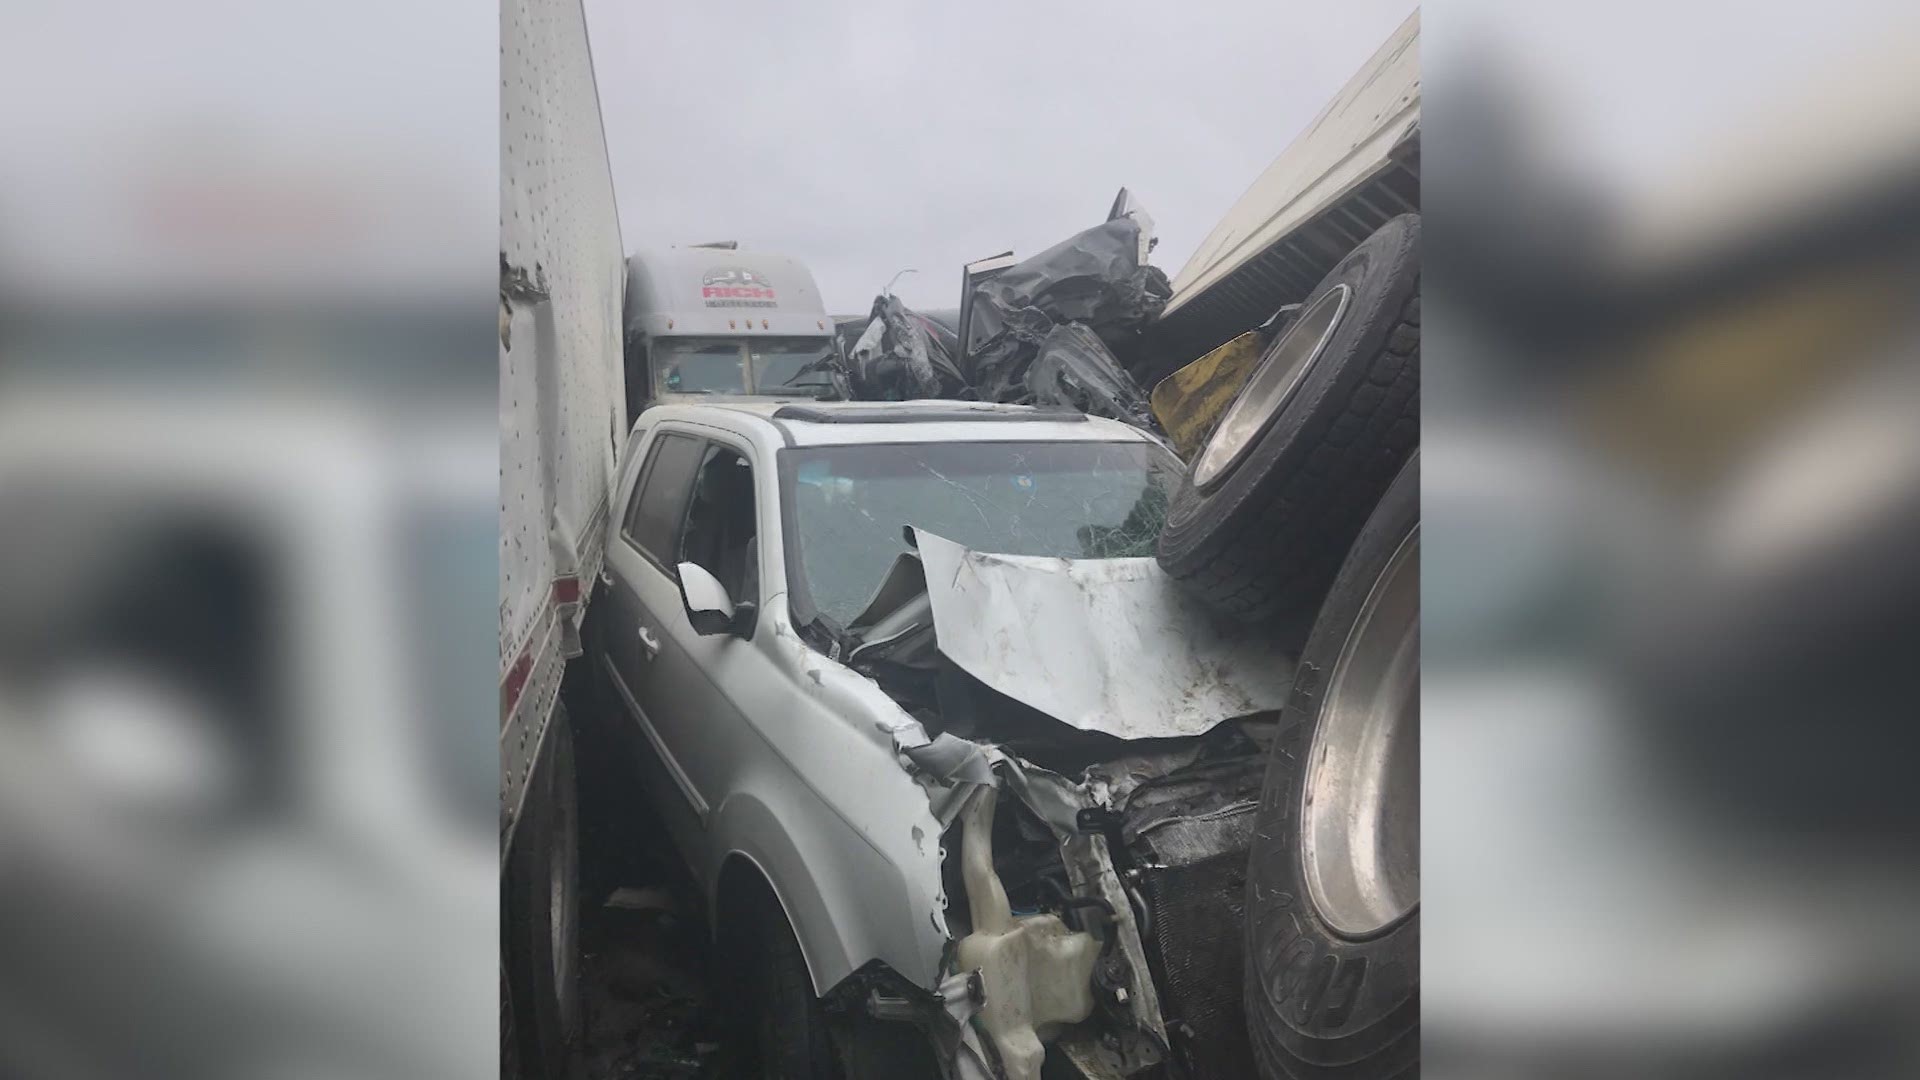 A photo of Alicia Stone's car shows it sandwiched between semi trucks; the wheels of one semi on top of her car.